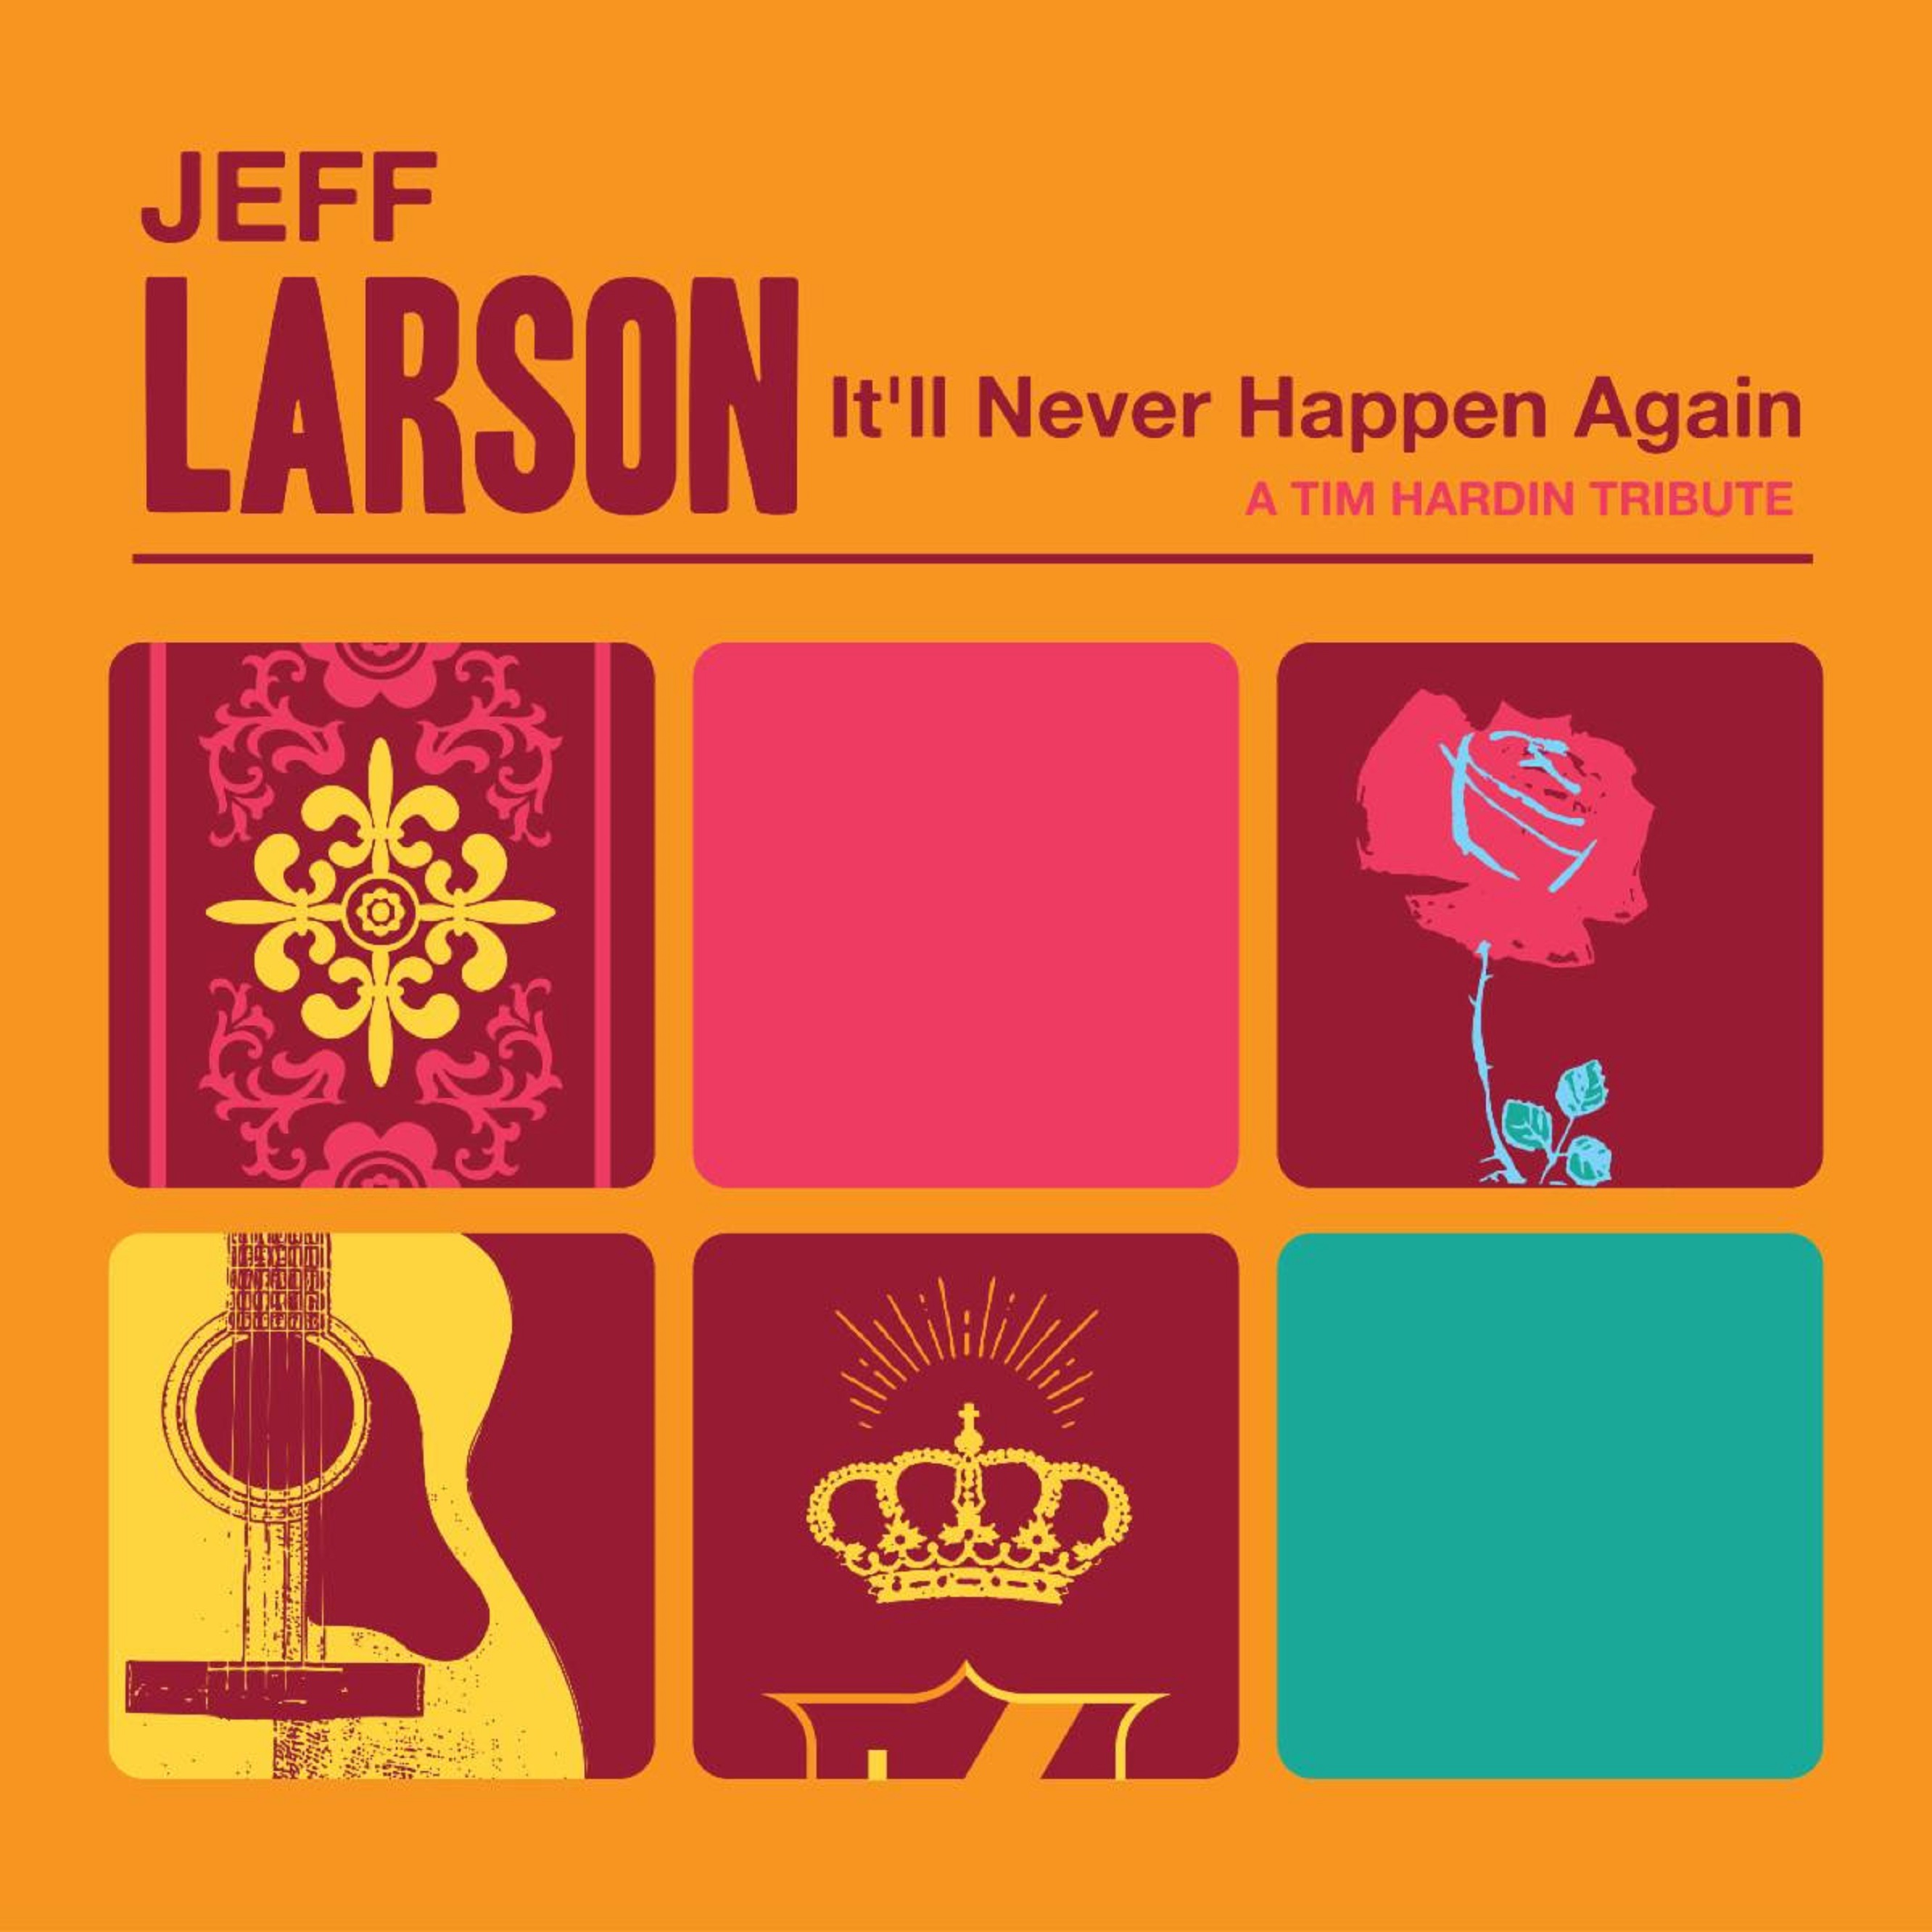 JEFF LARSON Unveils “Reason To Believe” Video/Lead Single From Tim Hardin Tribute EP Out 3/17